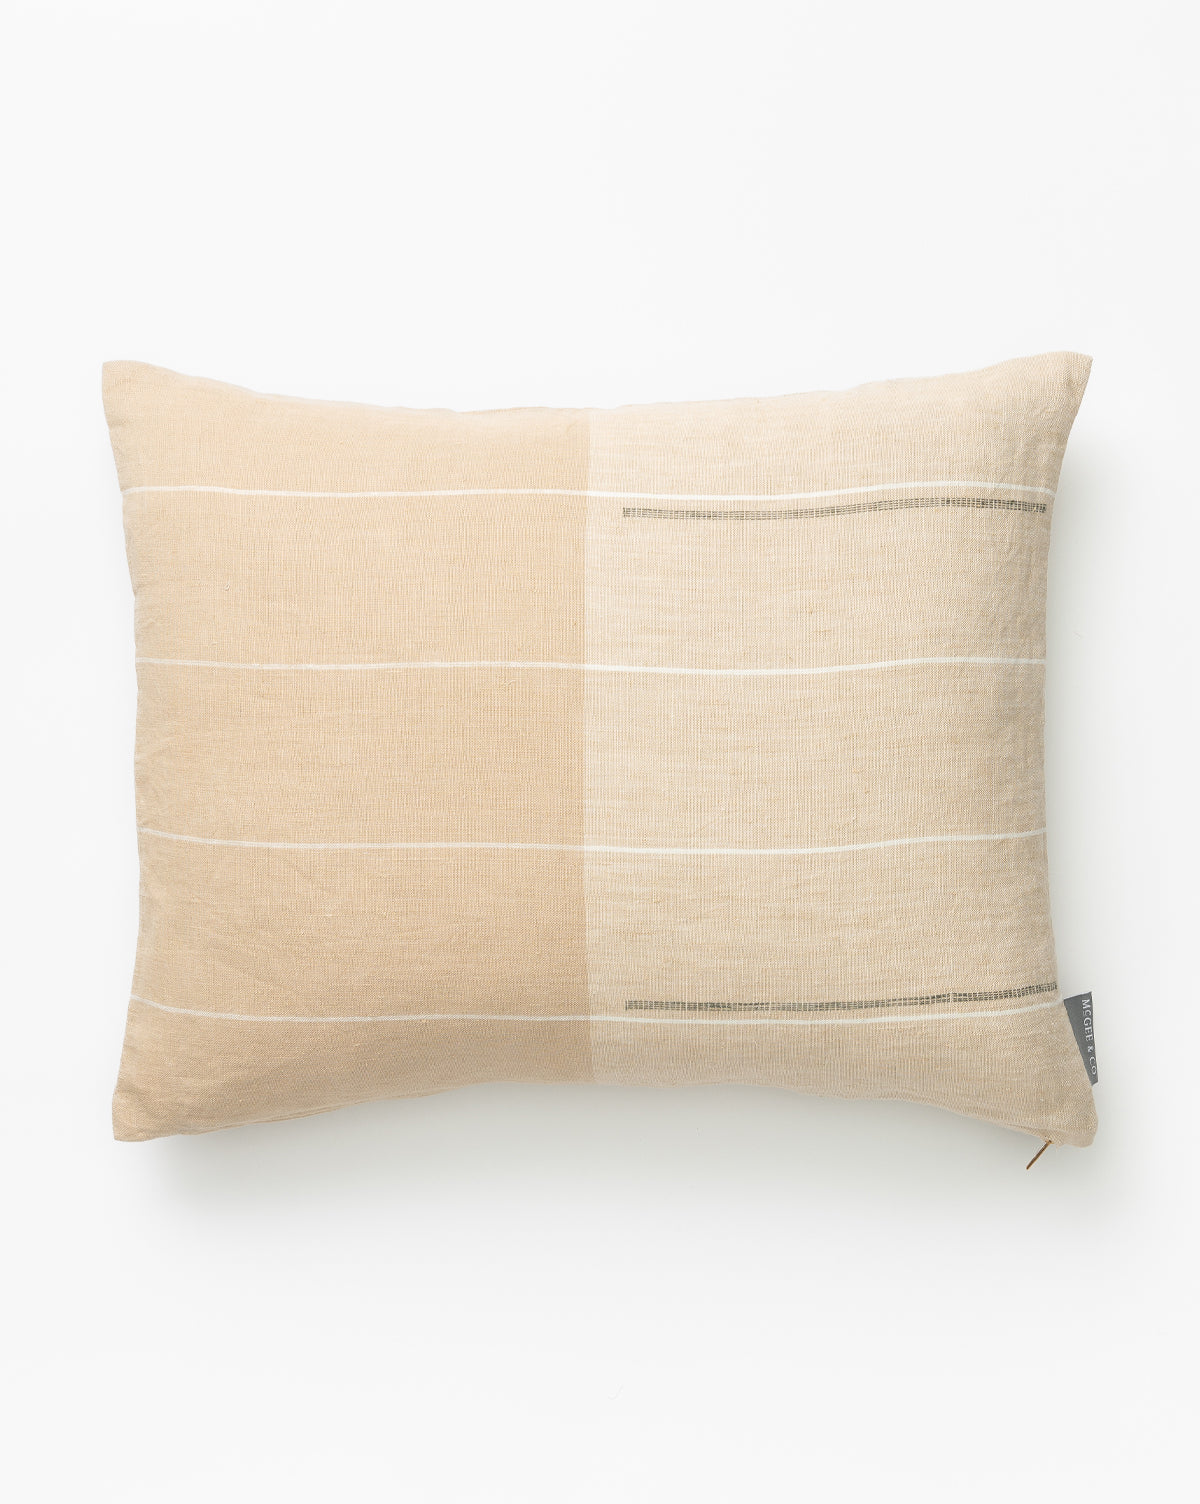 East India, Huron Pillow Cover